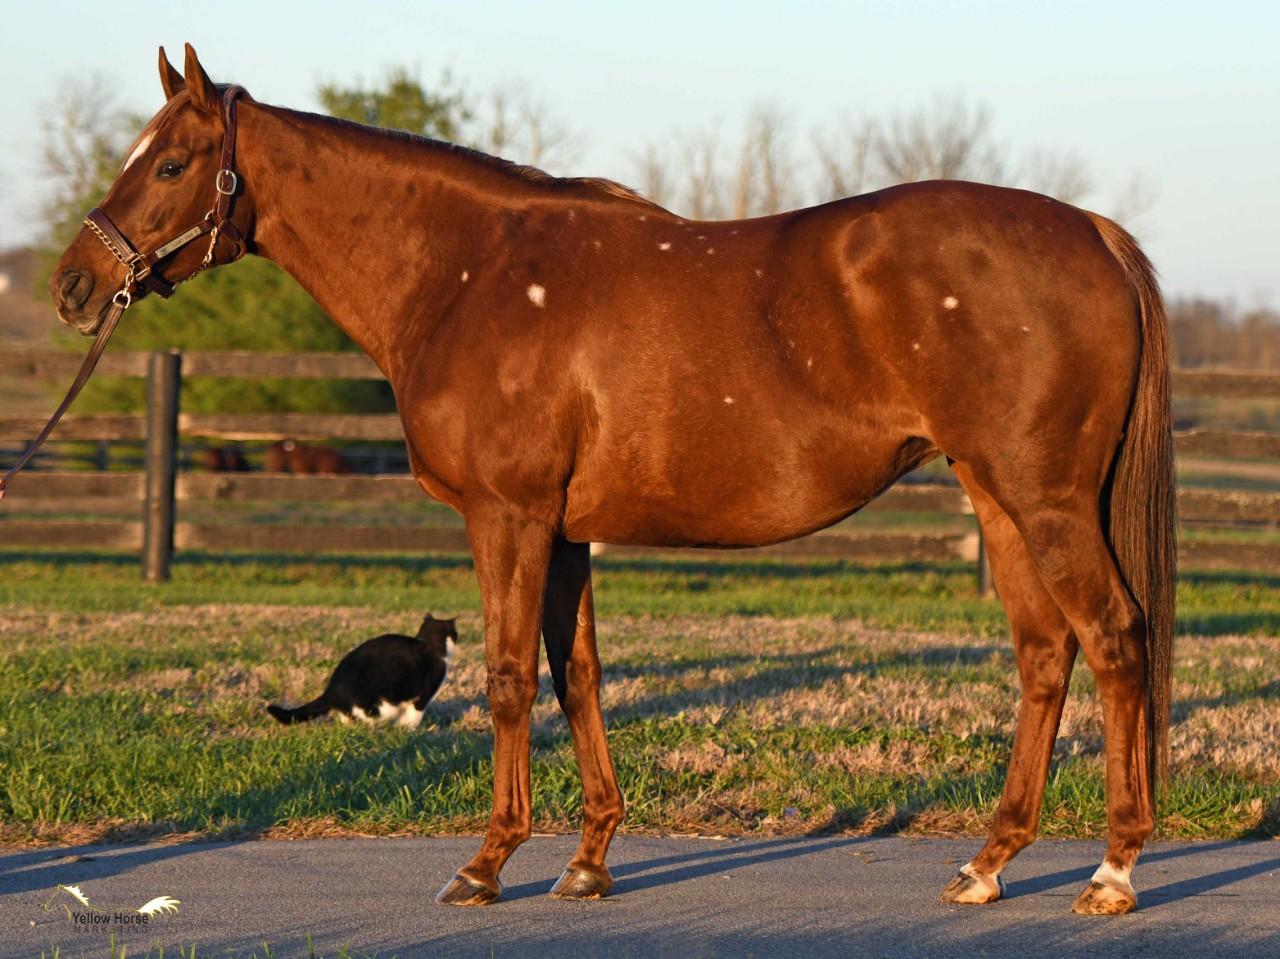 Colored Thoroughbred mare in foal